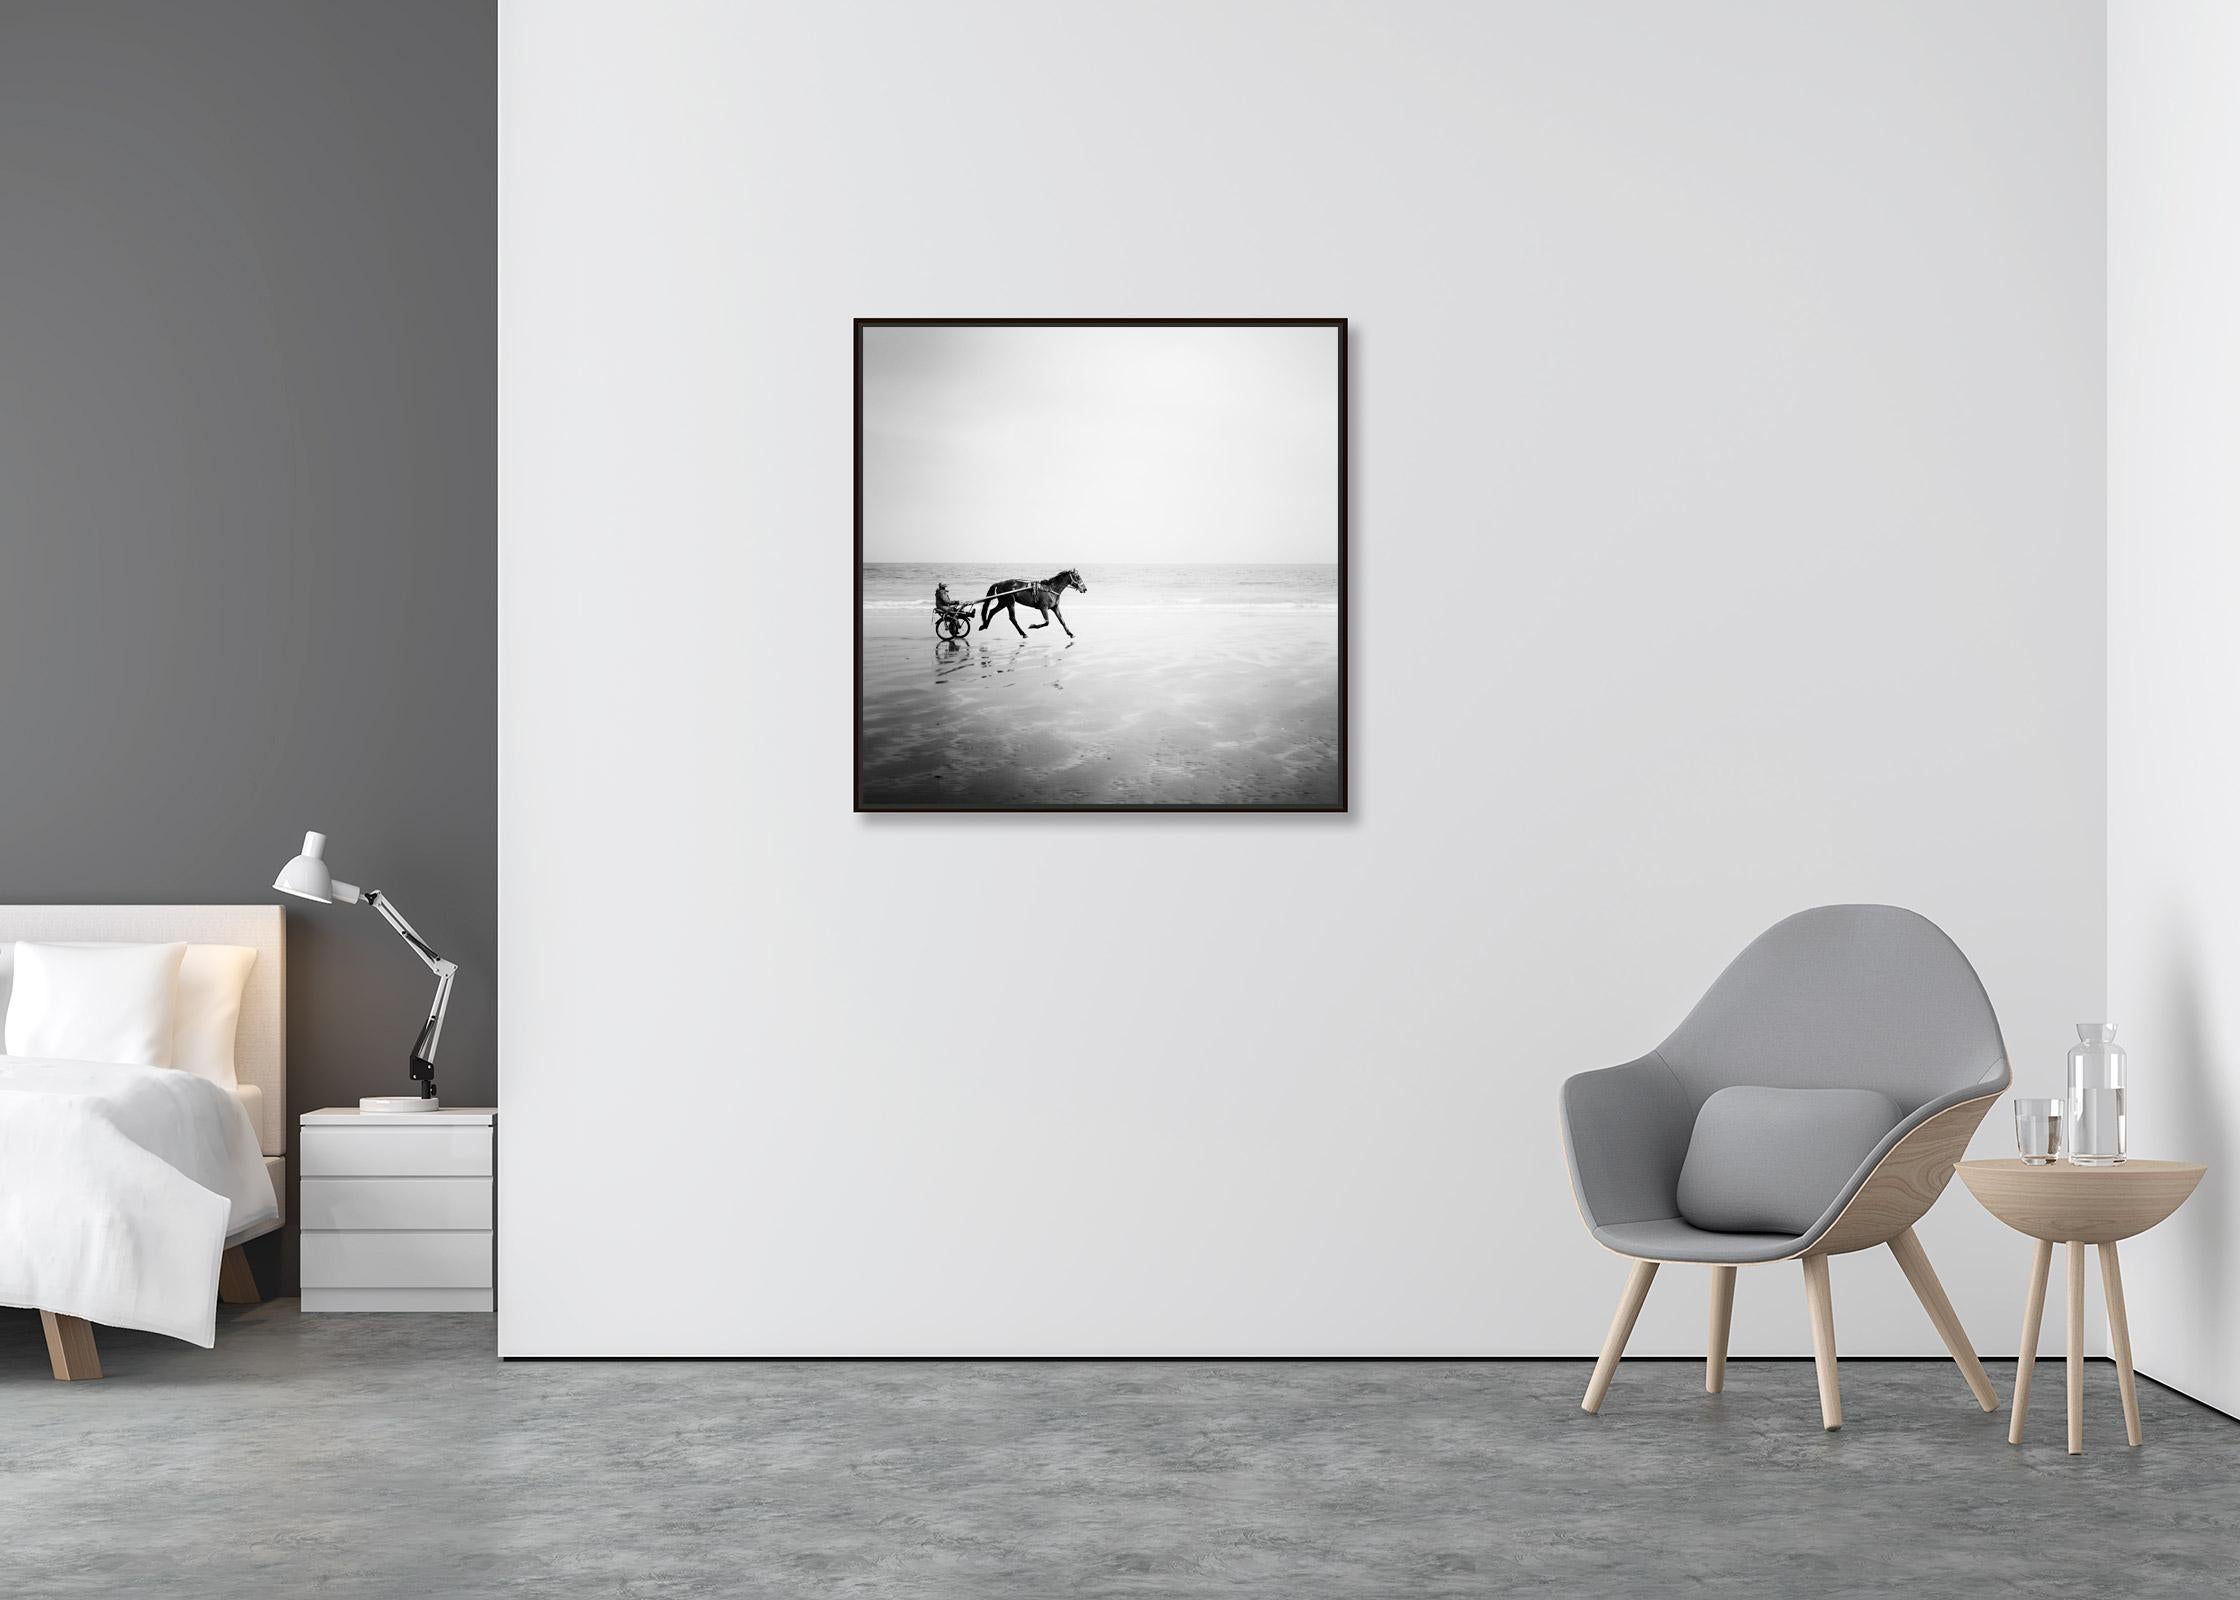 Harness Racing, France, Beach Normandie, France, black and white art photography - Contemporary Photograph by Gerald Berghammer